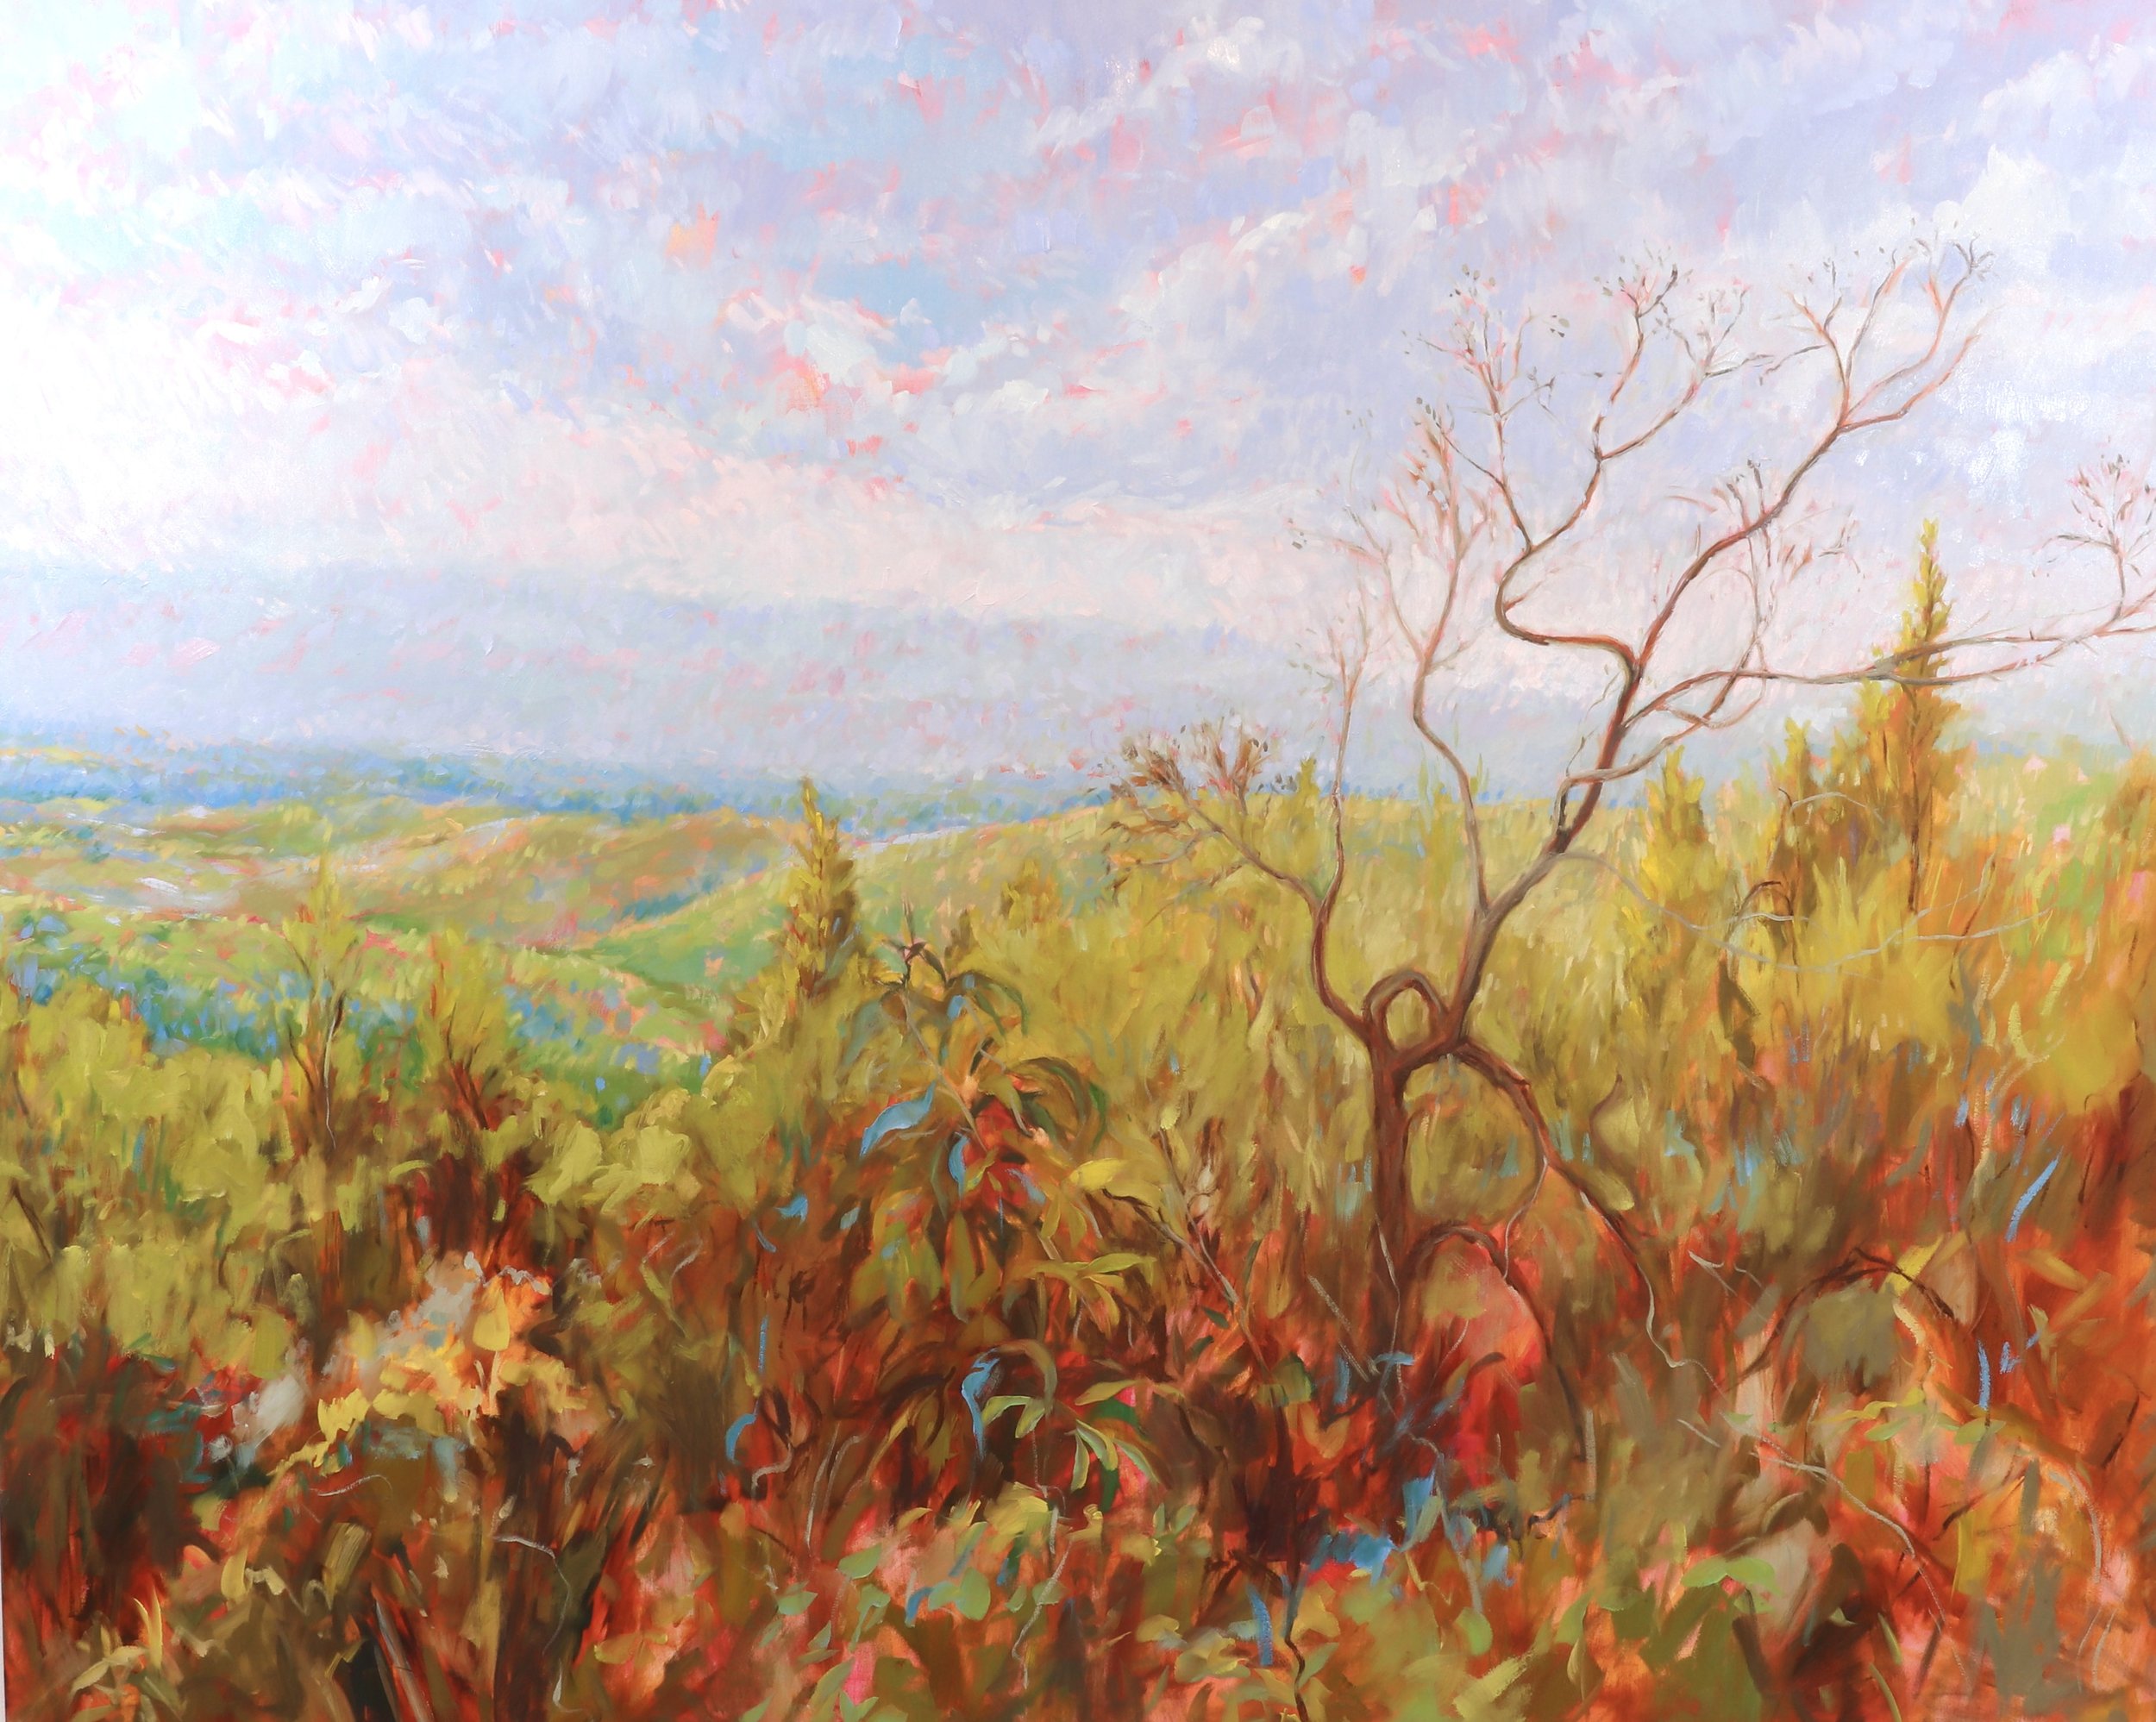 The-path-to-heaven-doesnt-lie-down-in-flat-miles-48x60-KatiePodracky-oil-on-canvas-blue-ridge-parkway.JPG